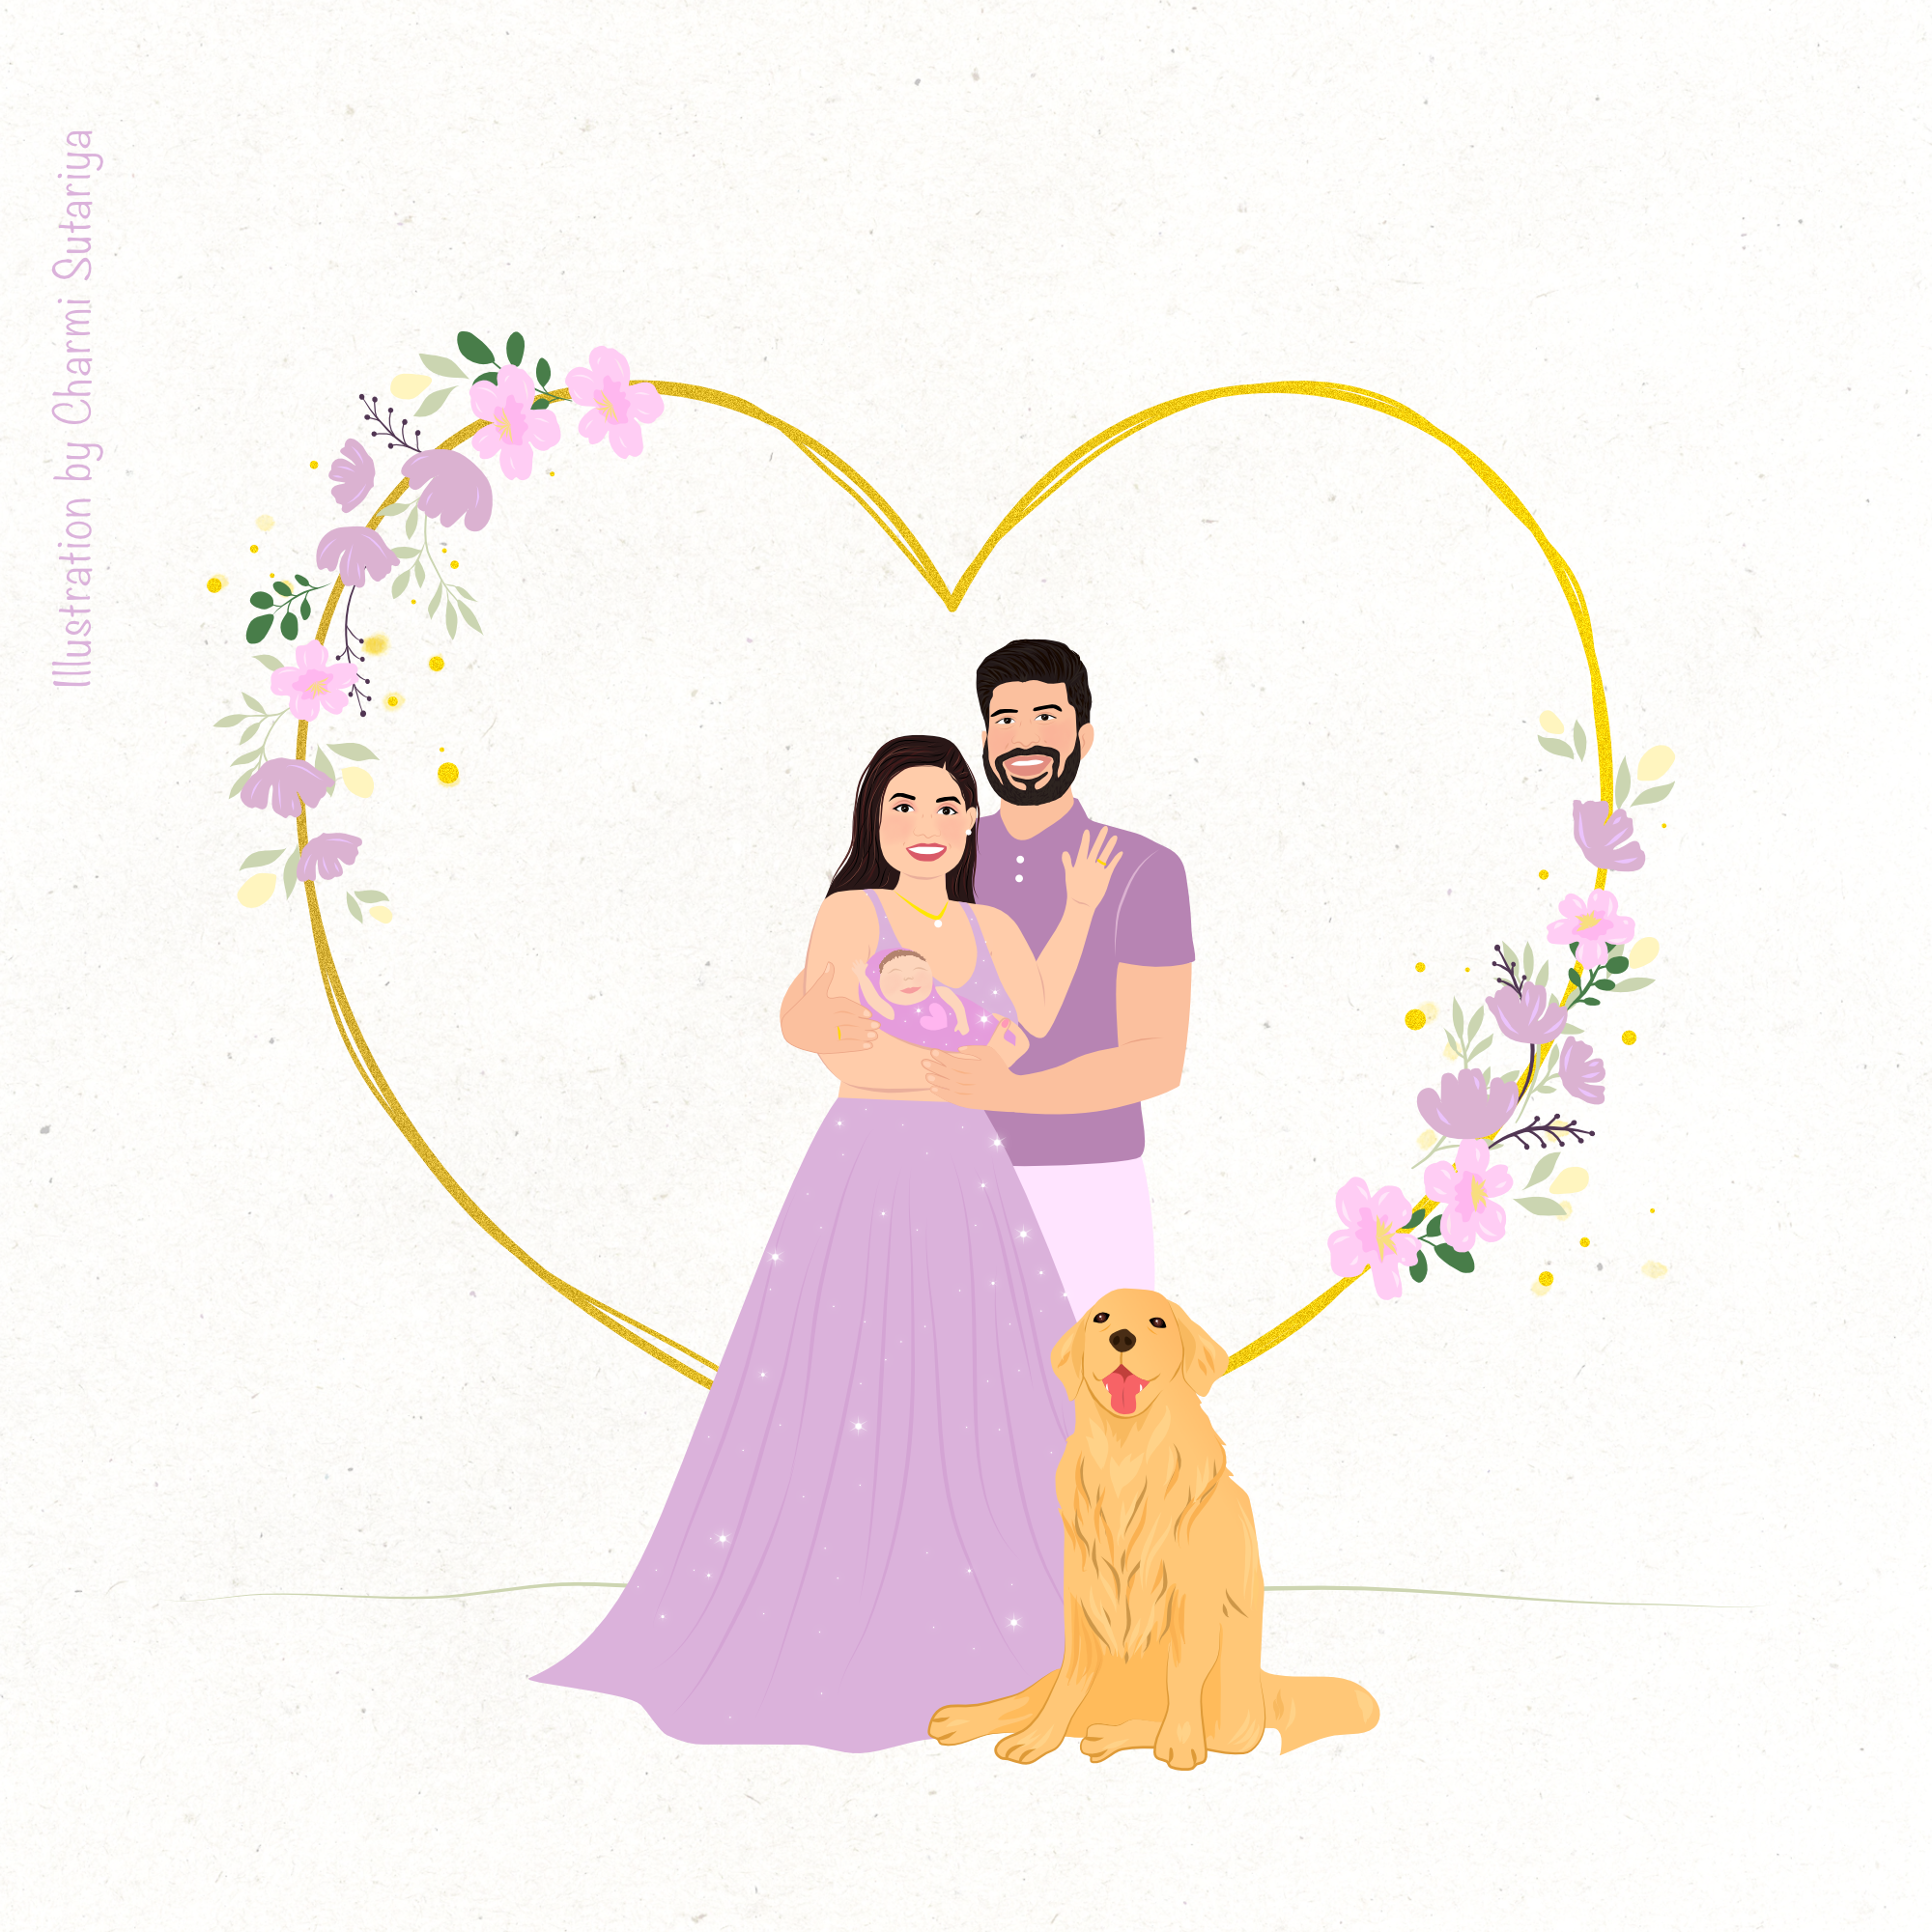 This is a family illustration that celebrates the occasion of welcoming their newborn baby girl.